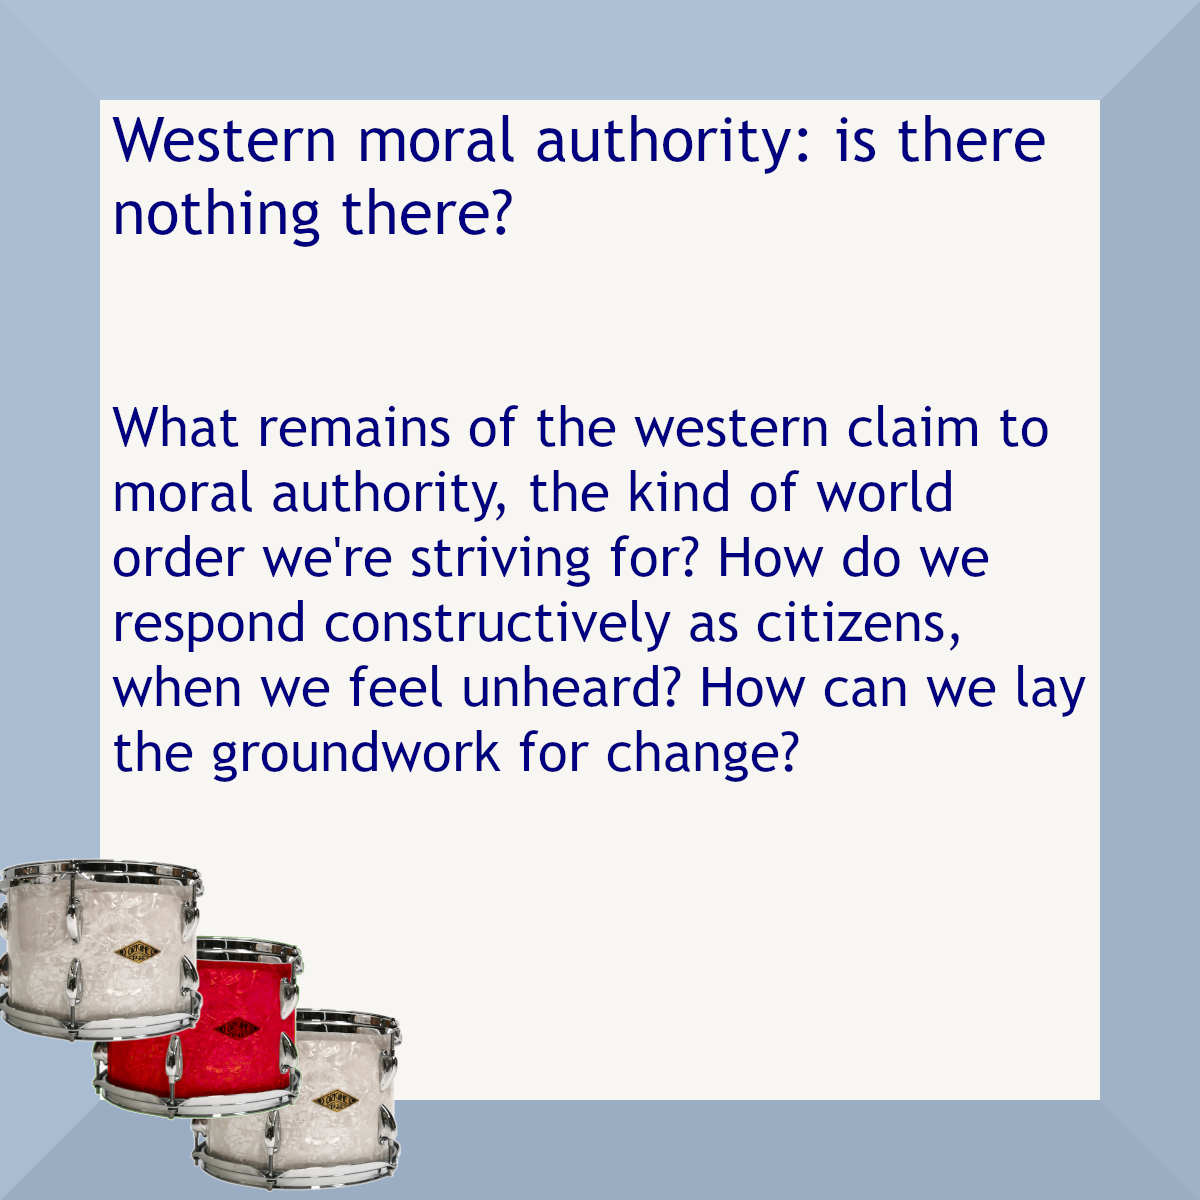 Blue border with three drums, one red. Text: Western moral authority: is there nothing there? What remains of the western claim to moral authority, the kind of world order we're striving for? How do we respond constructively as citizens, when we feel unheard? How can we lay the groundwork for change?